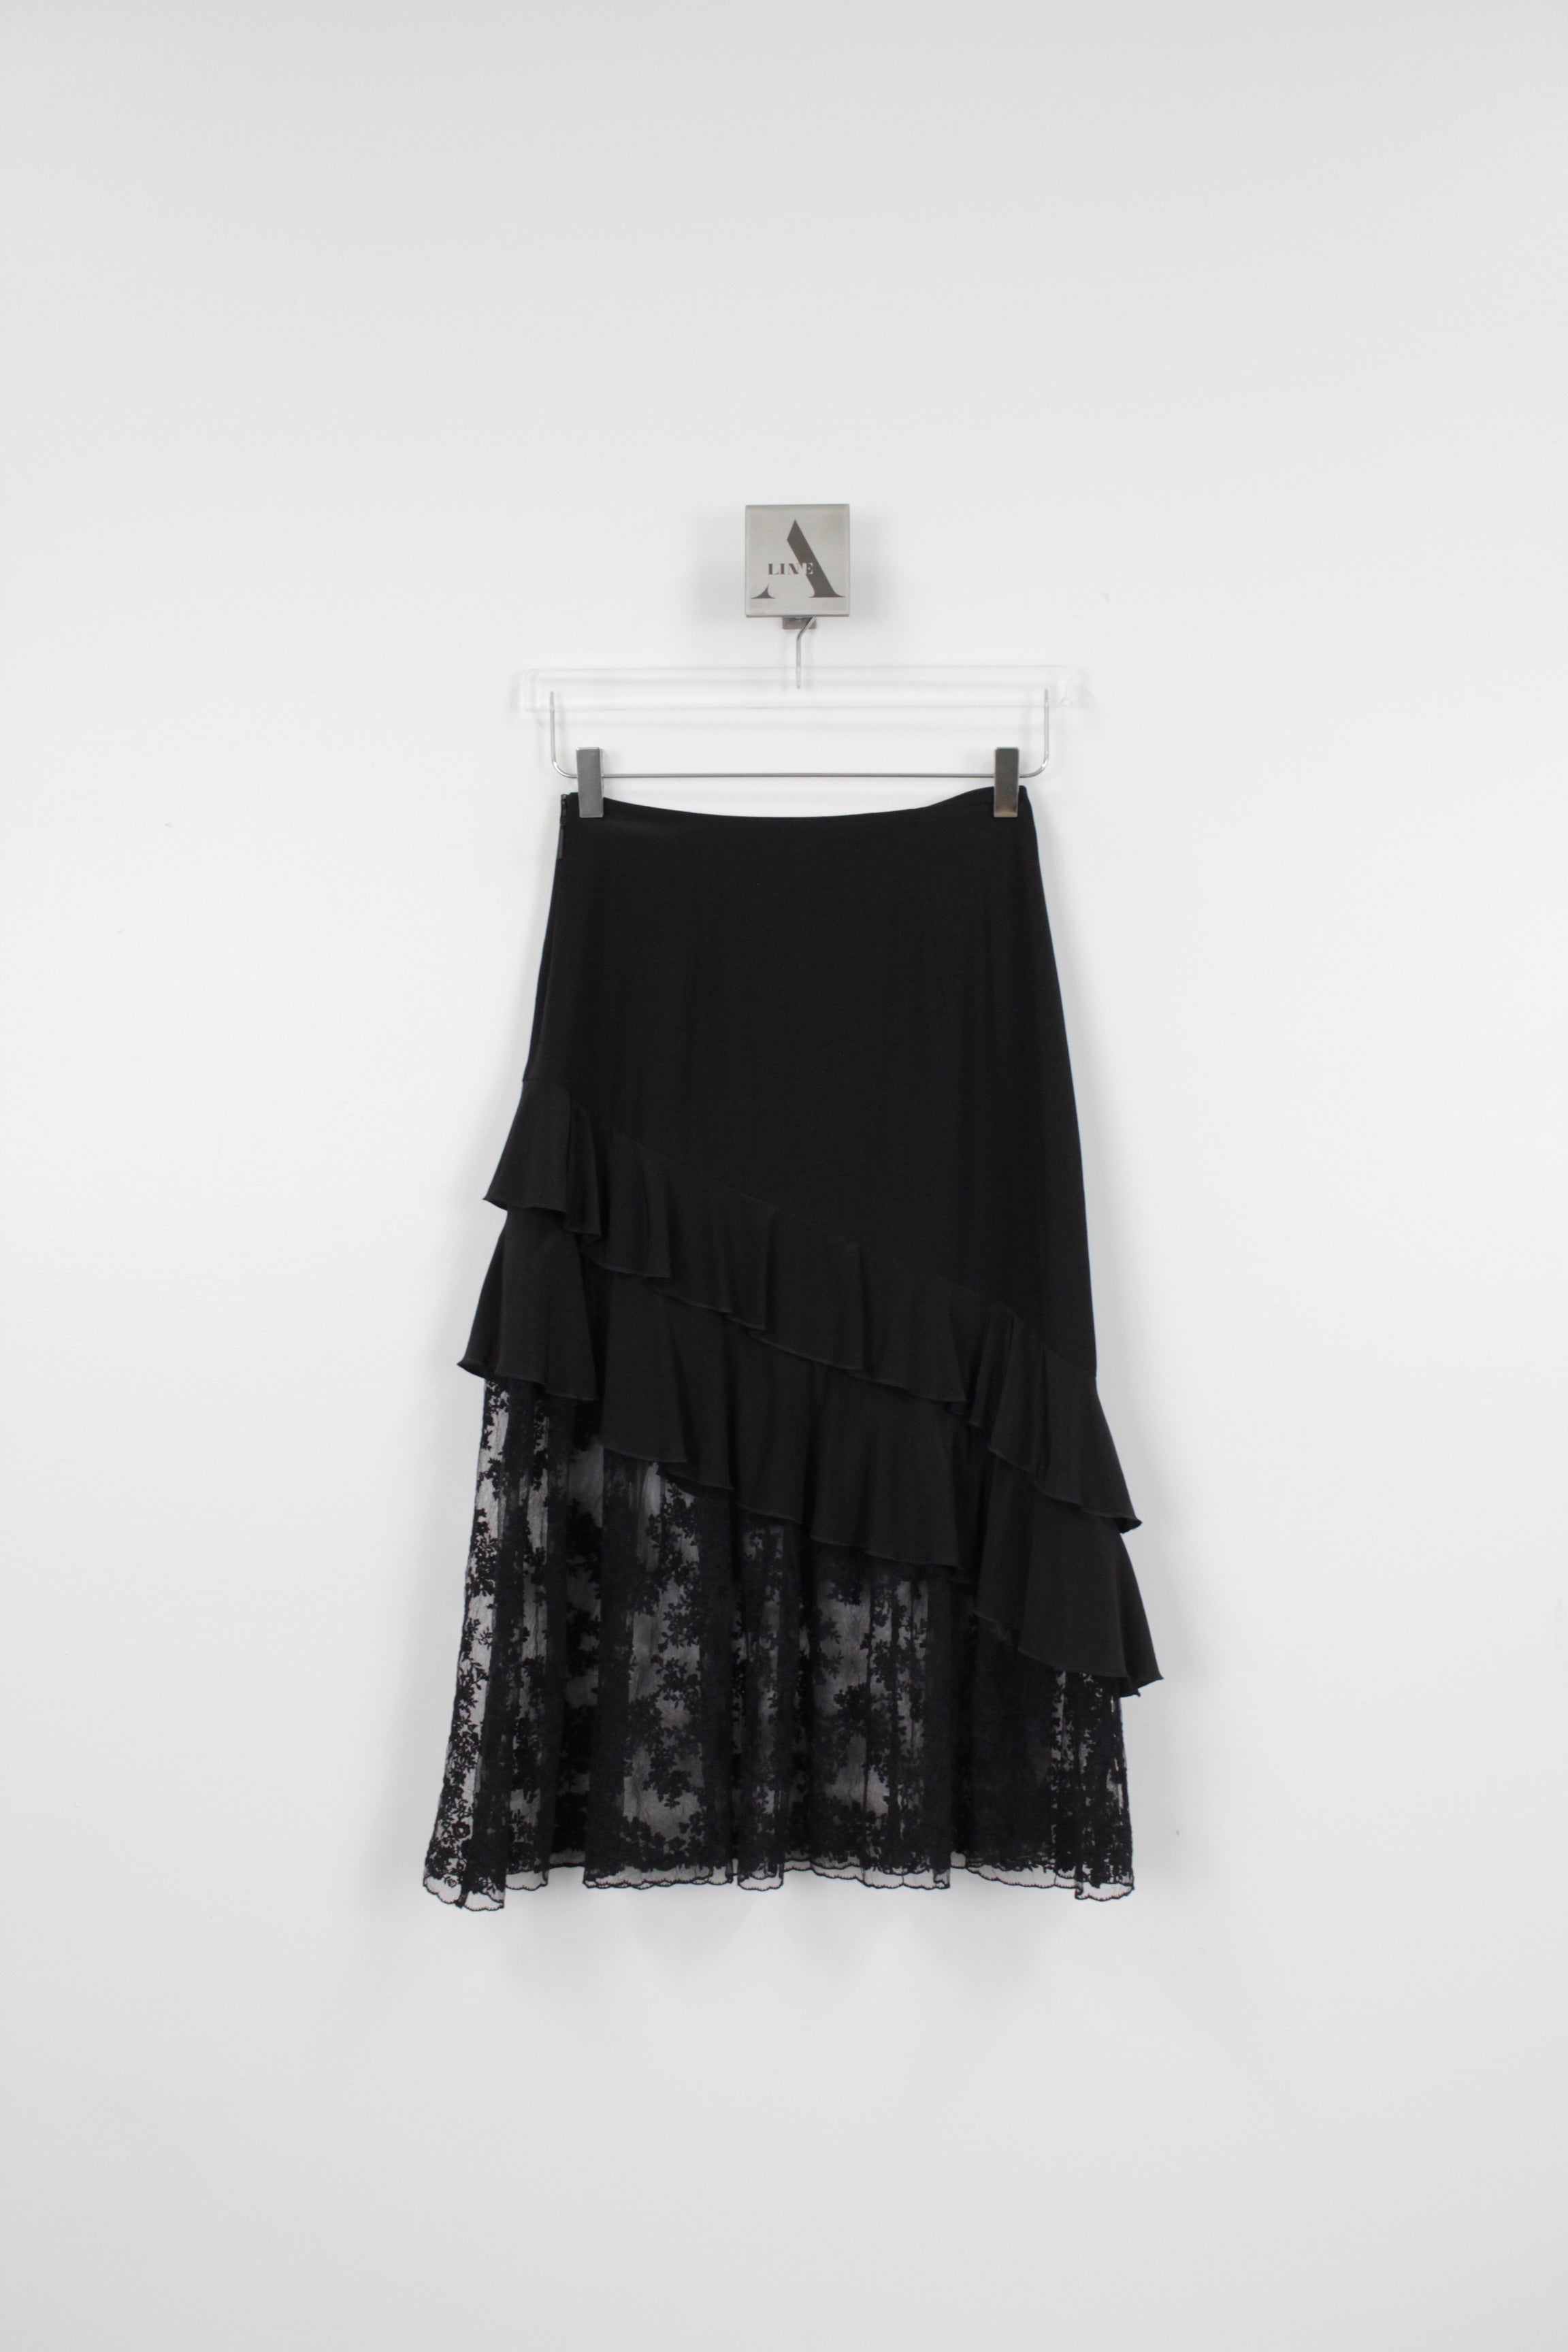 CDC RUFFLE SKIRT w/EMBROIDERED LACE TULLE COMBO